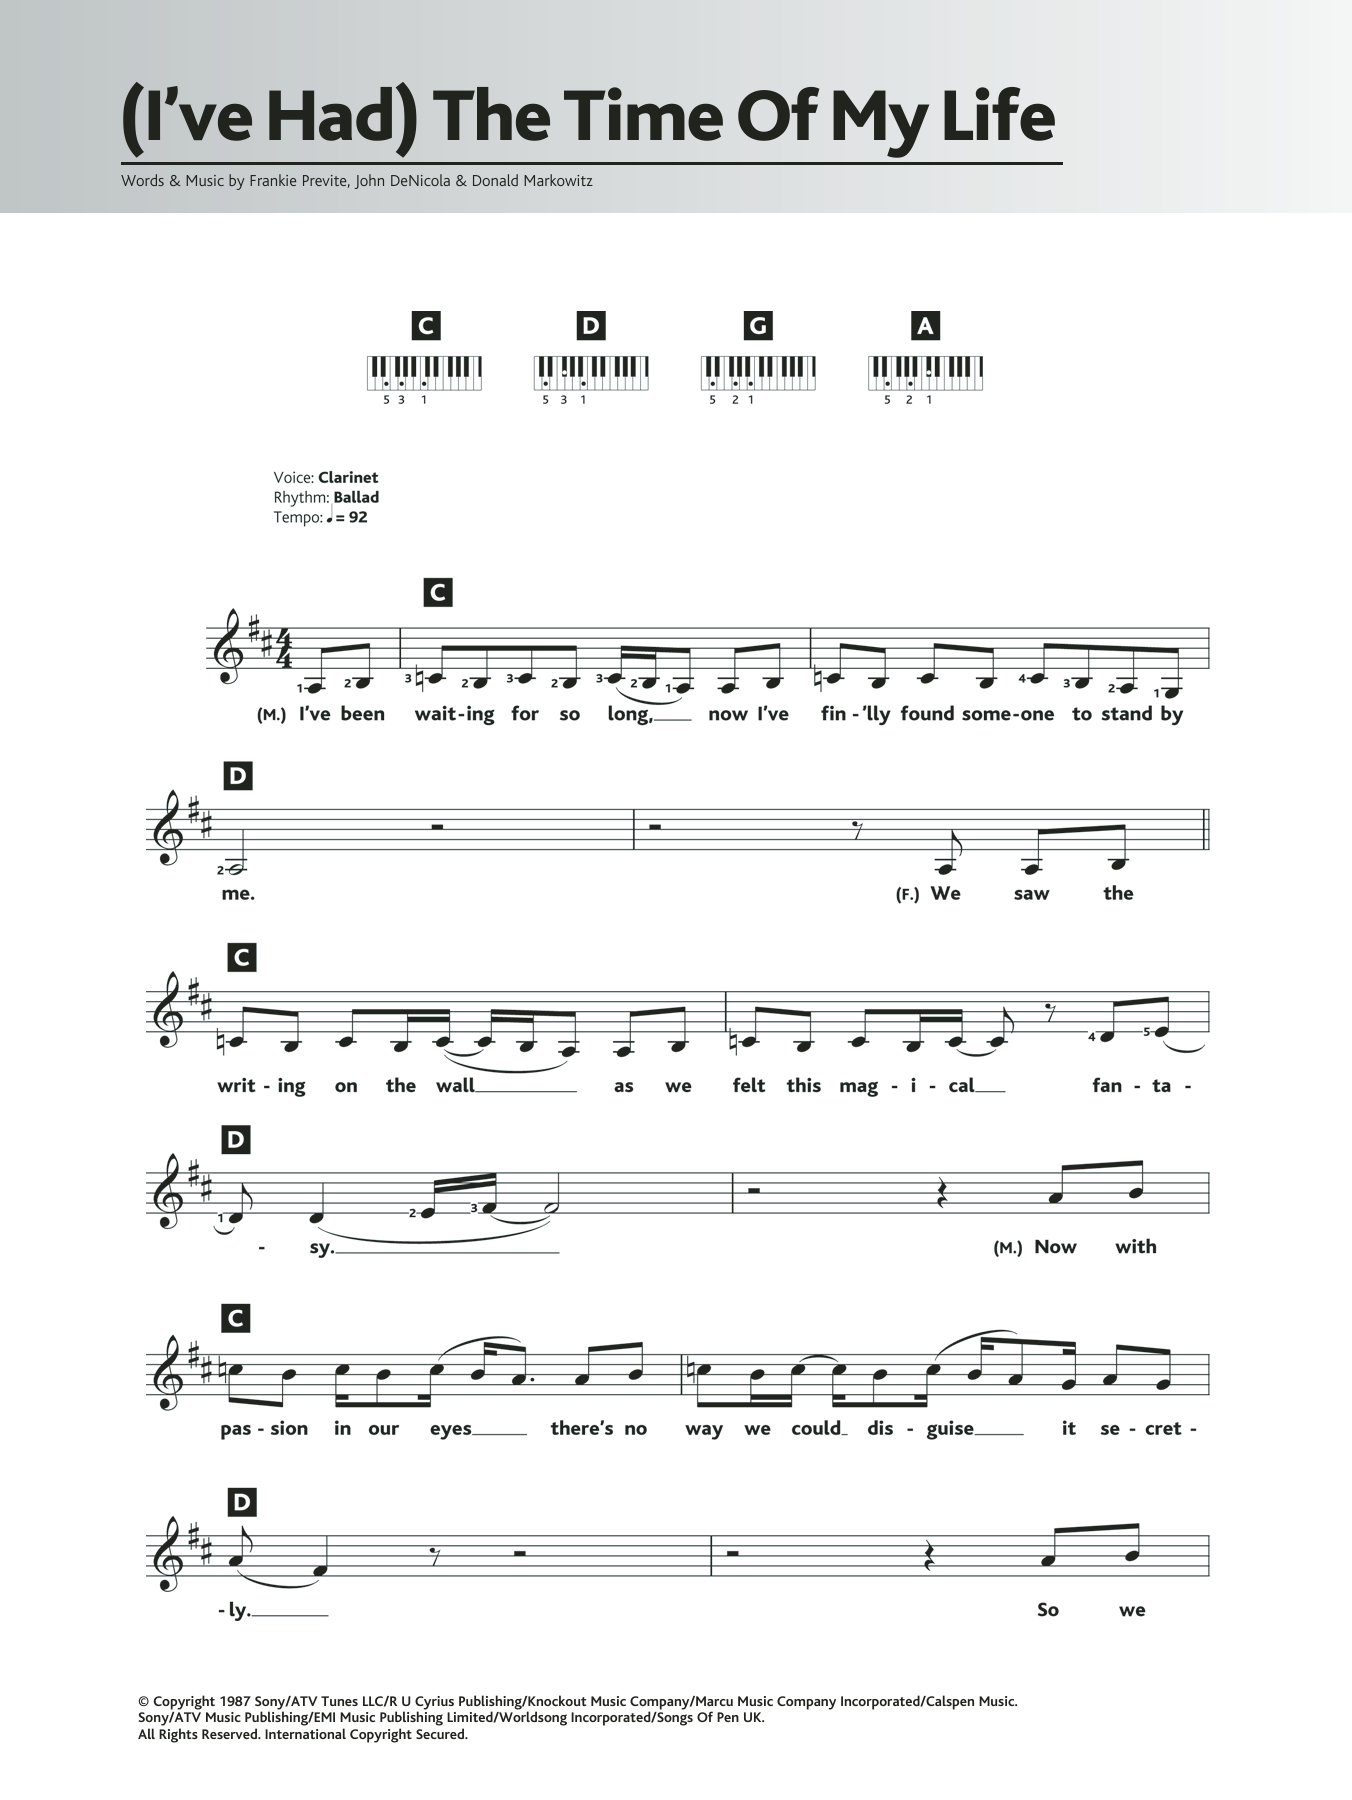 Download Bill Medley and Jennifer Warnes (I've Had) The Time Of My Life Sheet Music